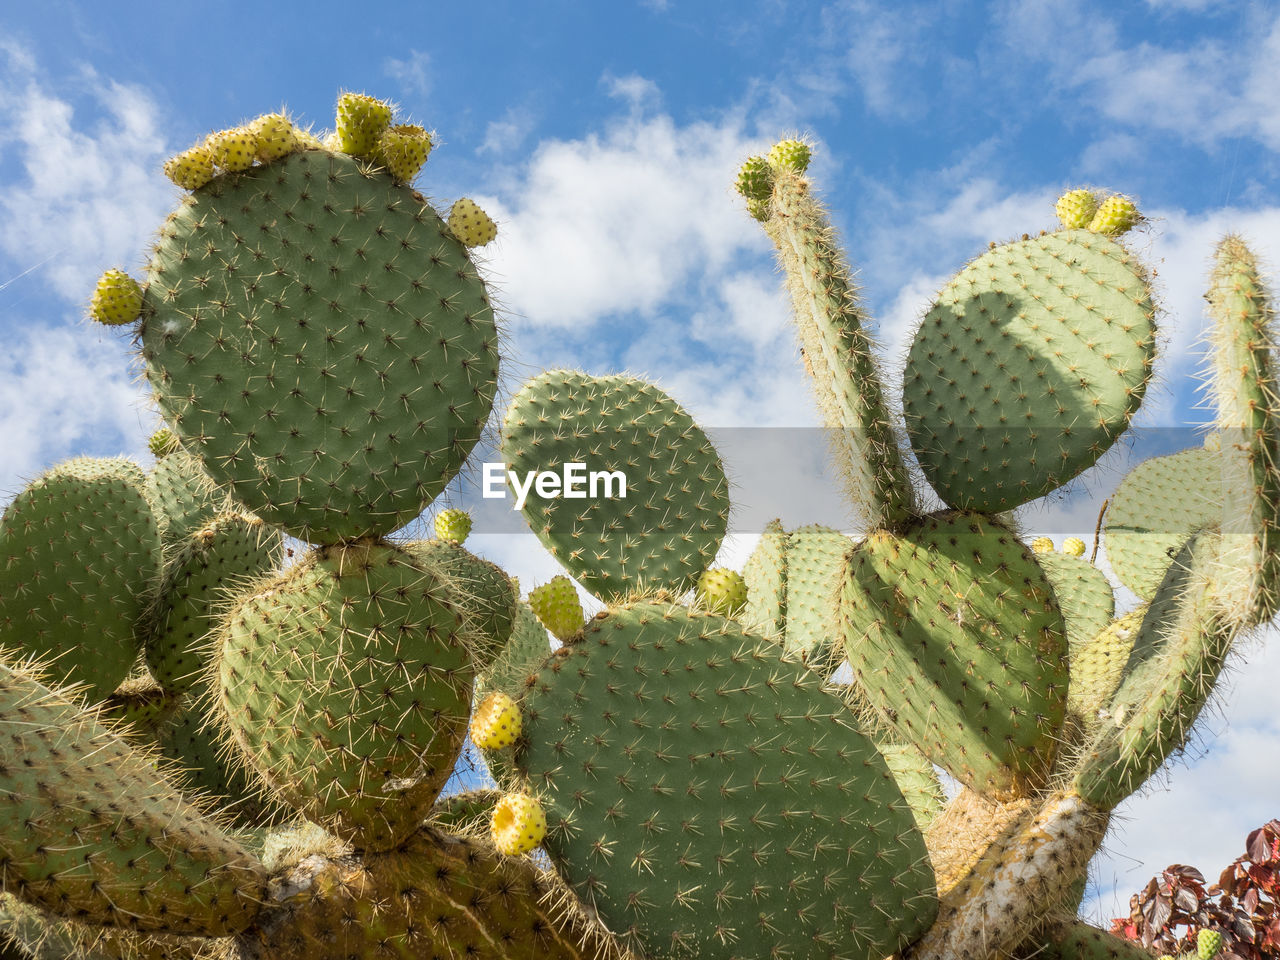 CLOSE-UP OF PRICKLY PEAR CACTUS GROWING OUTDOORS